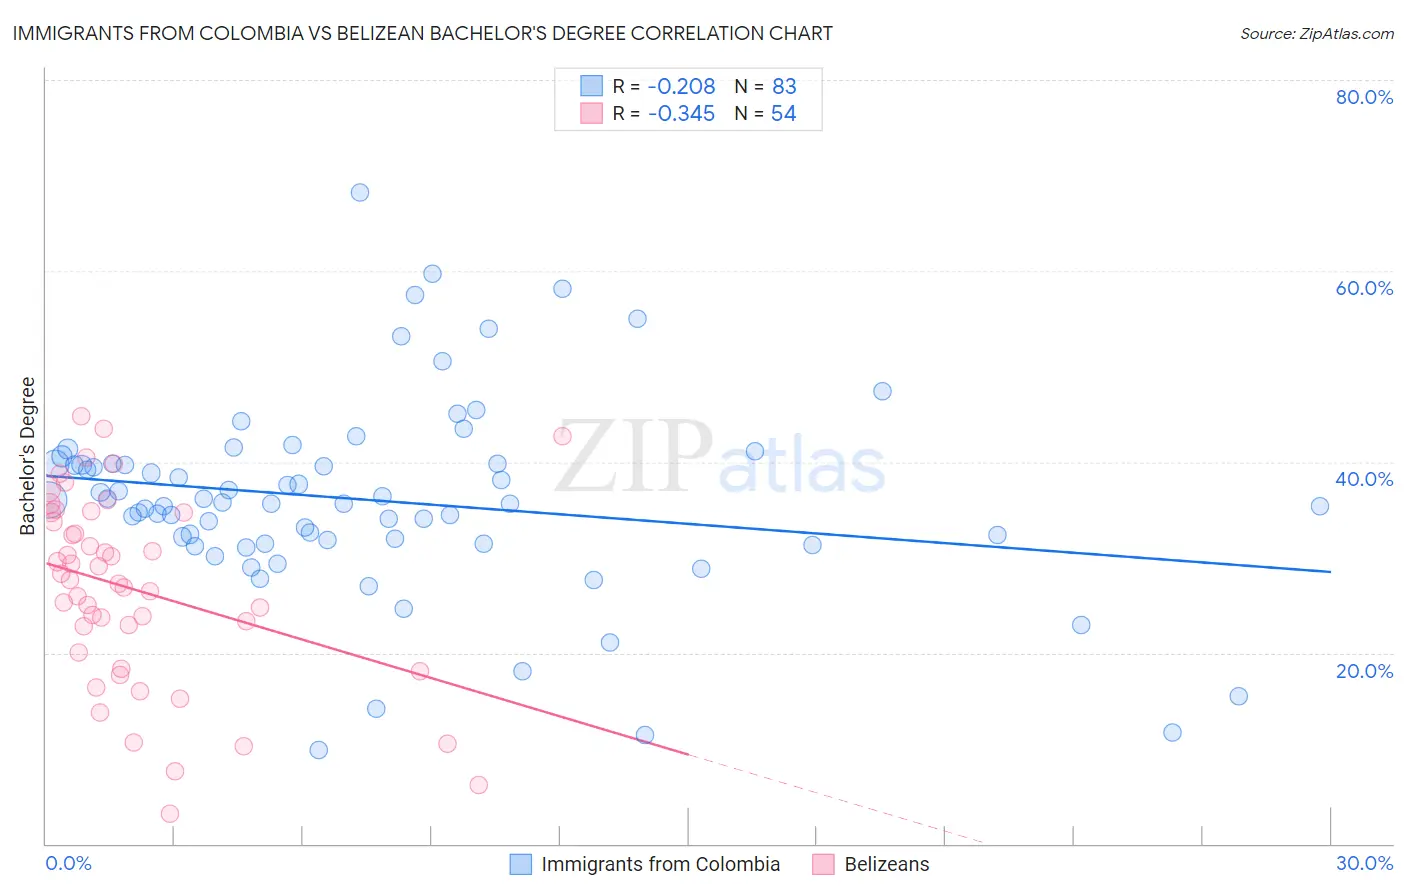 Immigrants from Colombia vs Belizean Bachelor's Degree